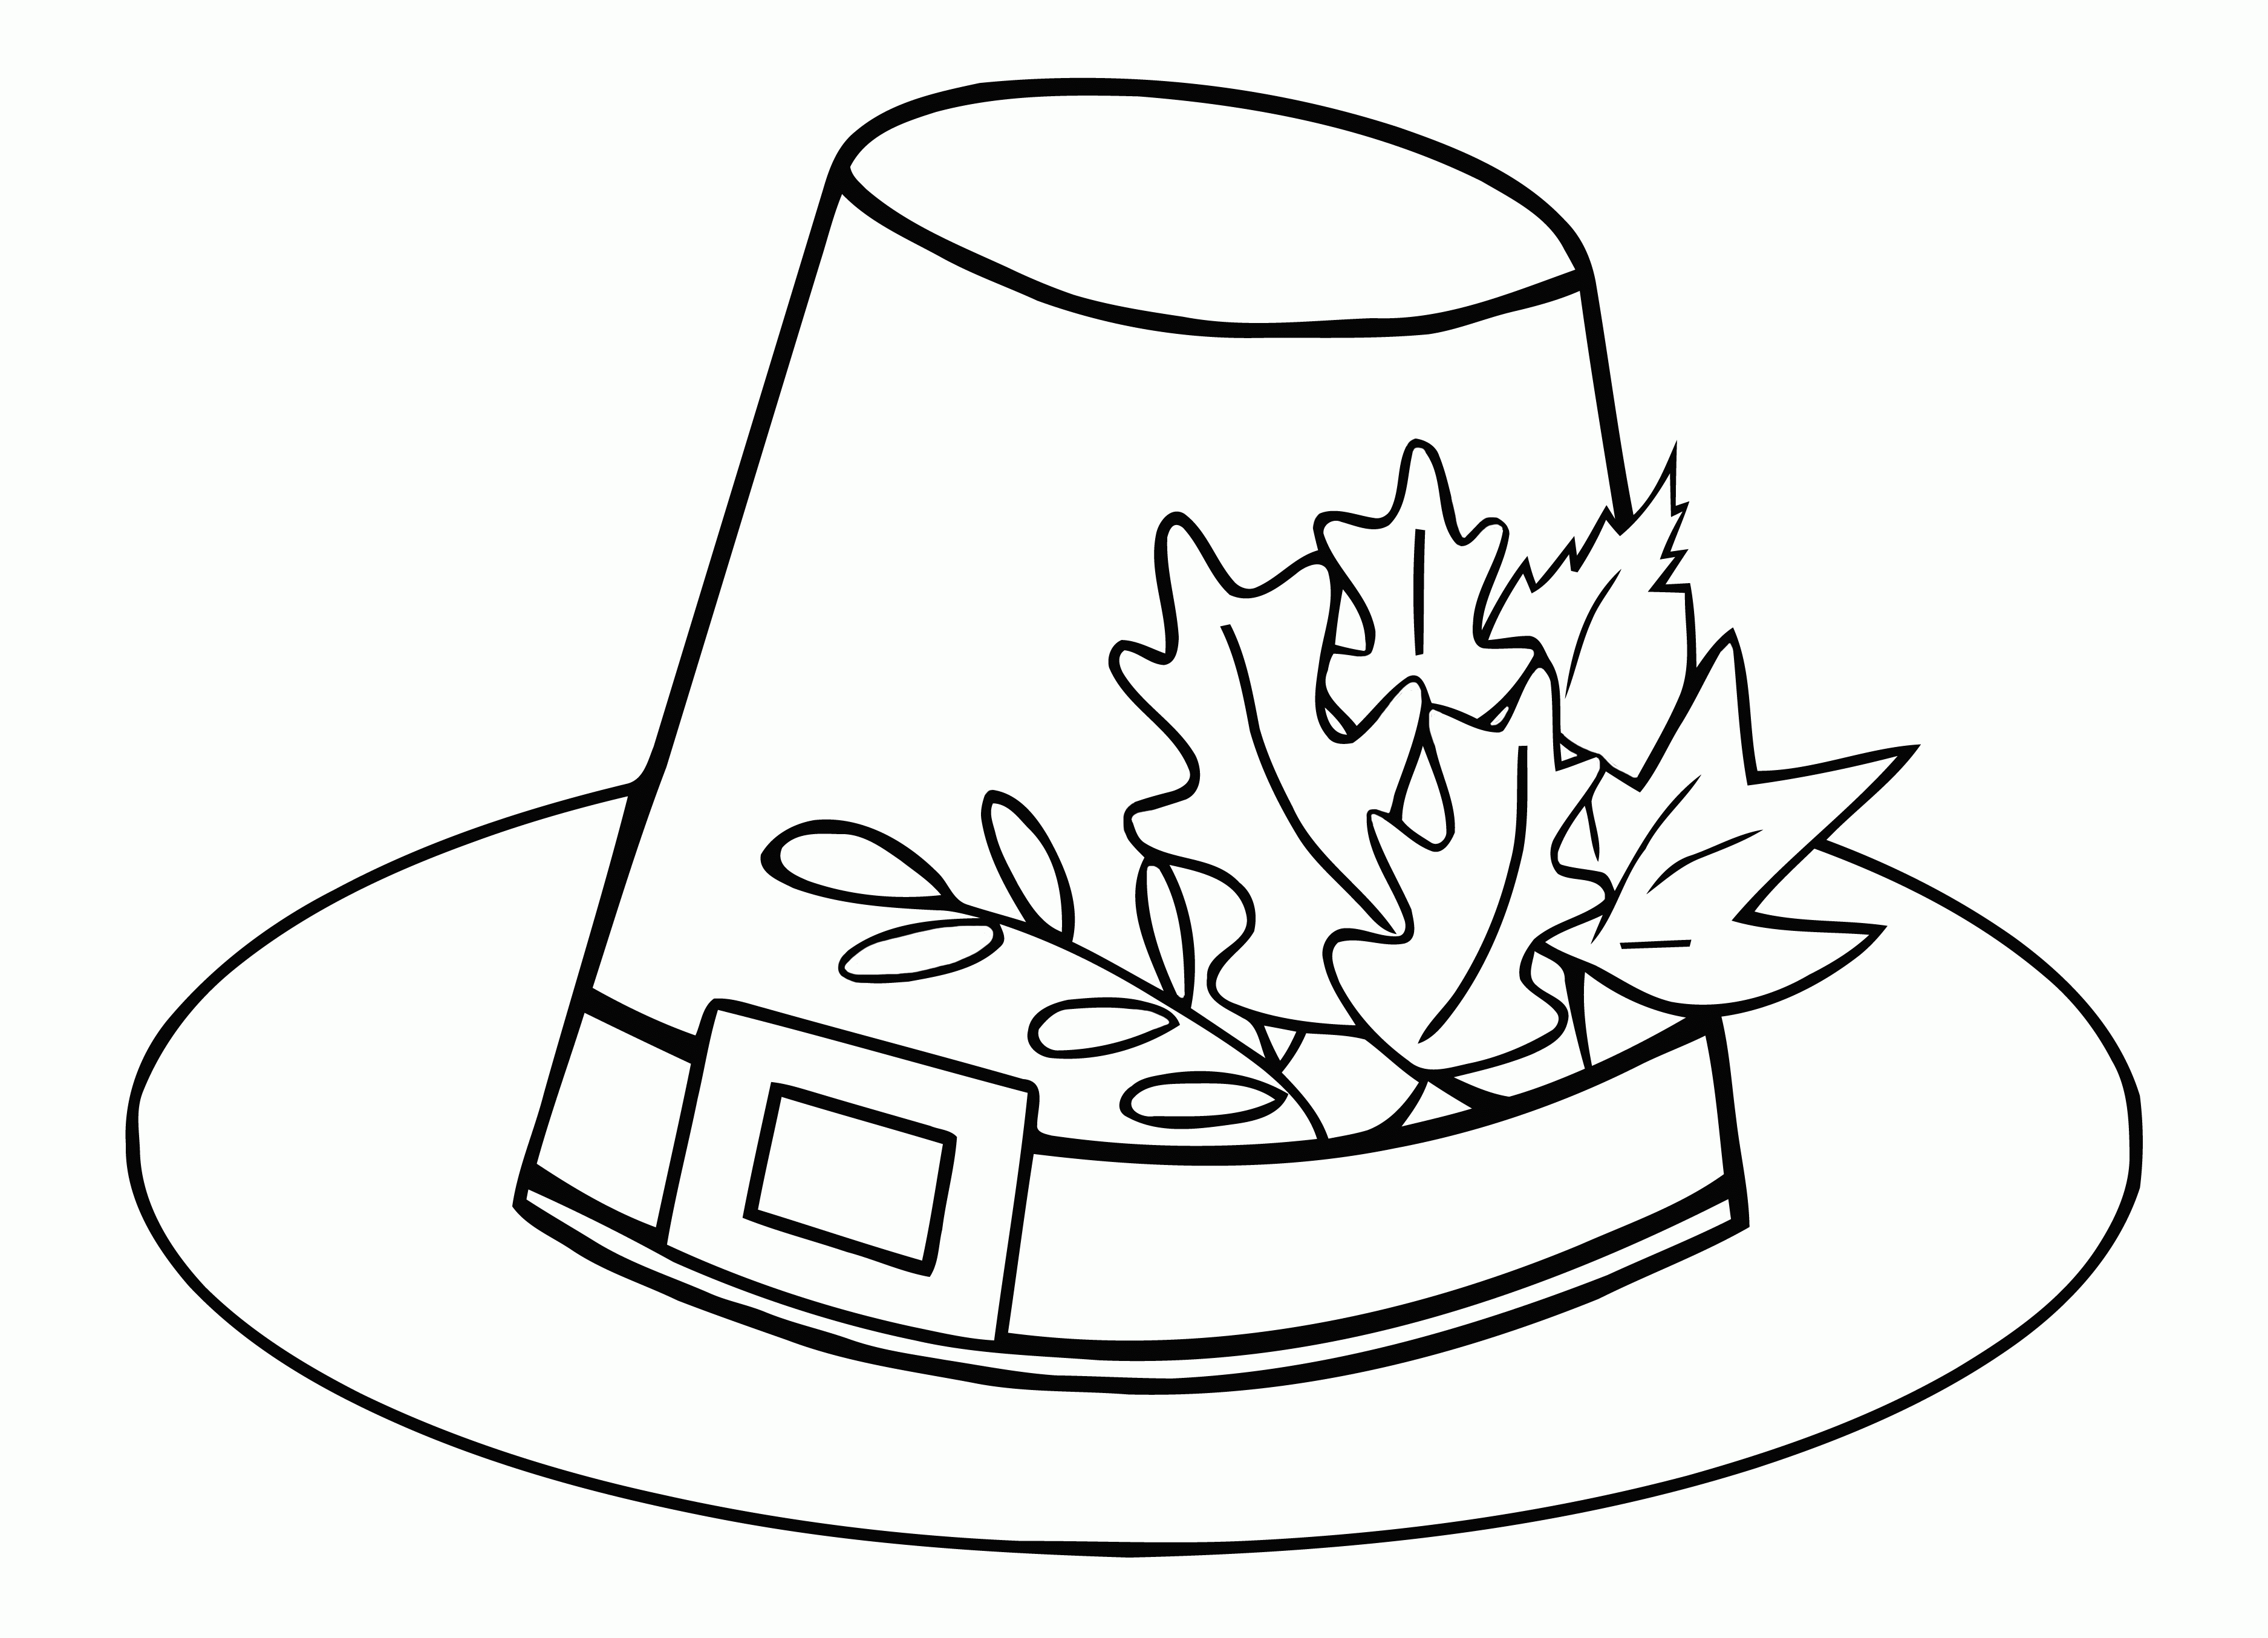 Top Hat Outline - Cliparts.co